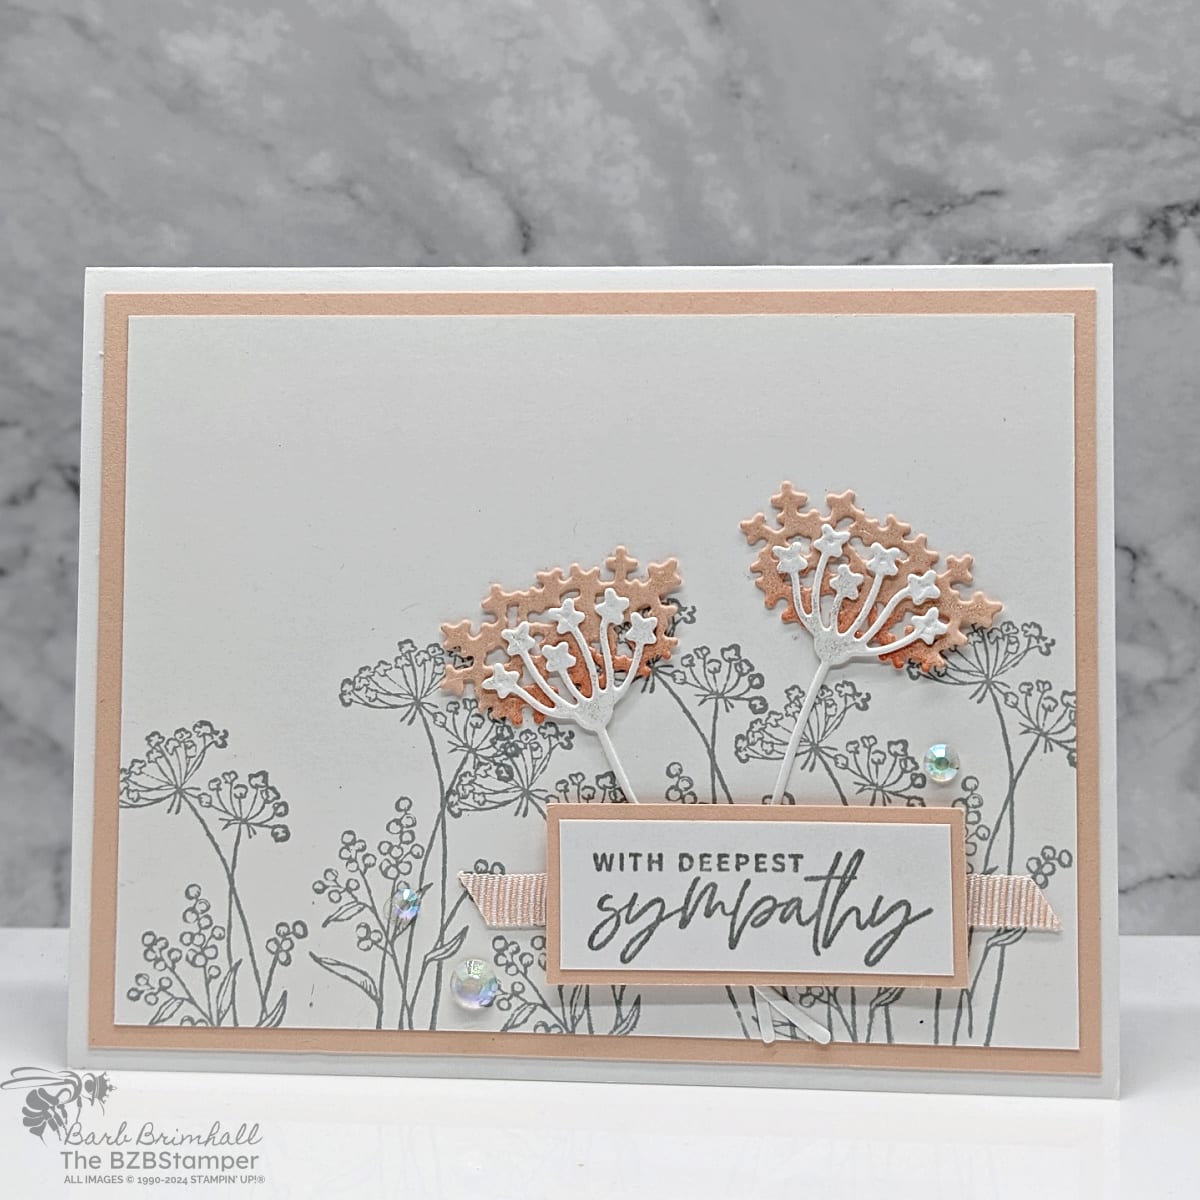 Sympathy Card using the Dainty Delight Stamp Set